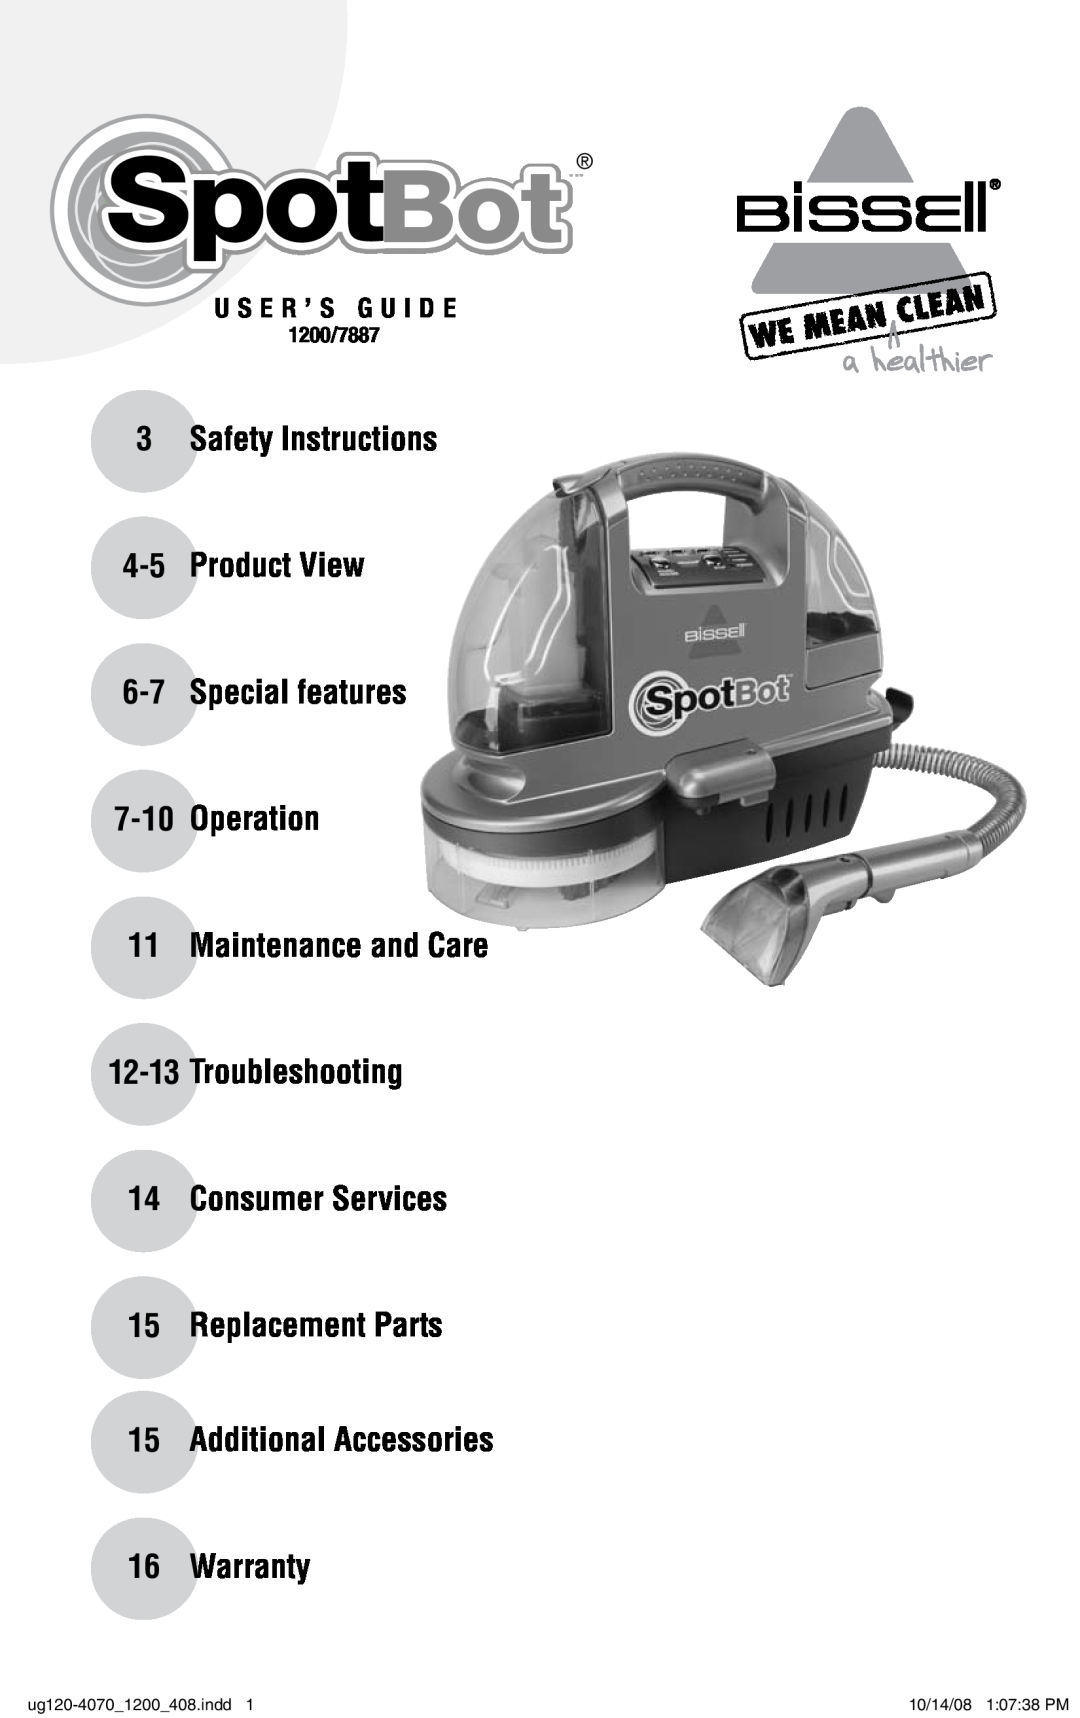 Bissell 1200, 7887 warranty Safety Instructions 4-5 Product View 6-7 Special features, Warranty, U S E R ’ S G U I D E 